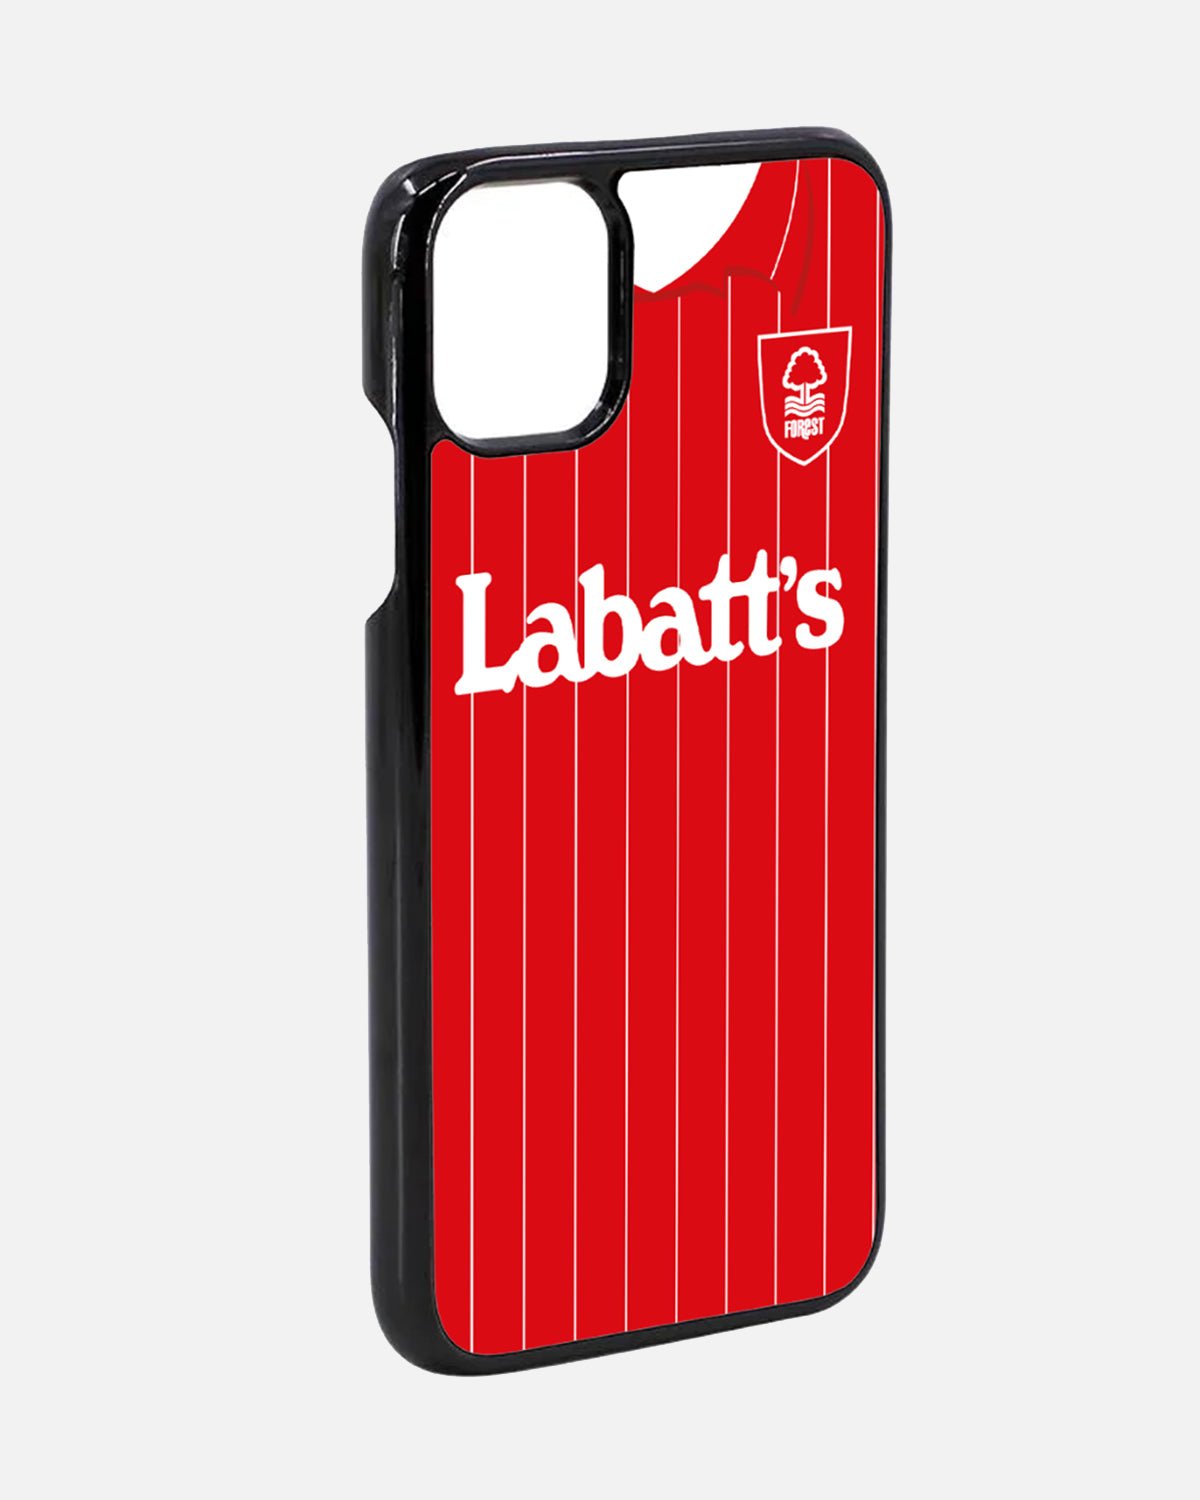 NFFC 1993 Home Kit Phone Cover - Nottingham Forest FC